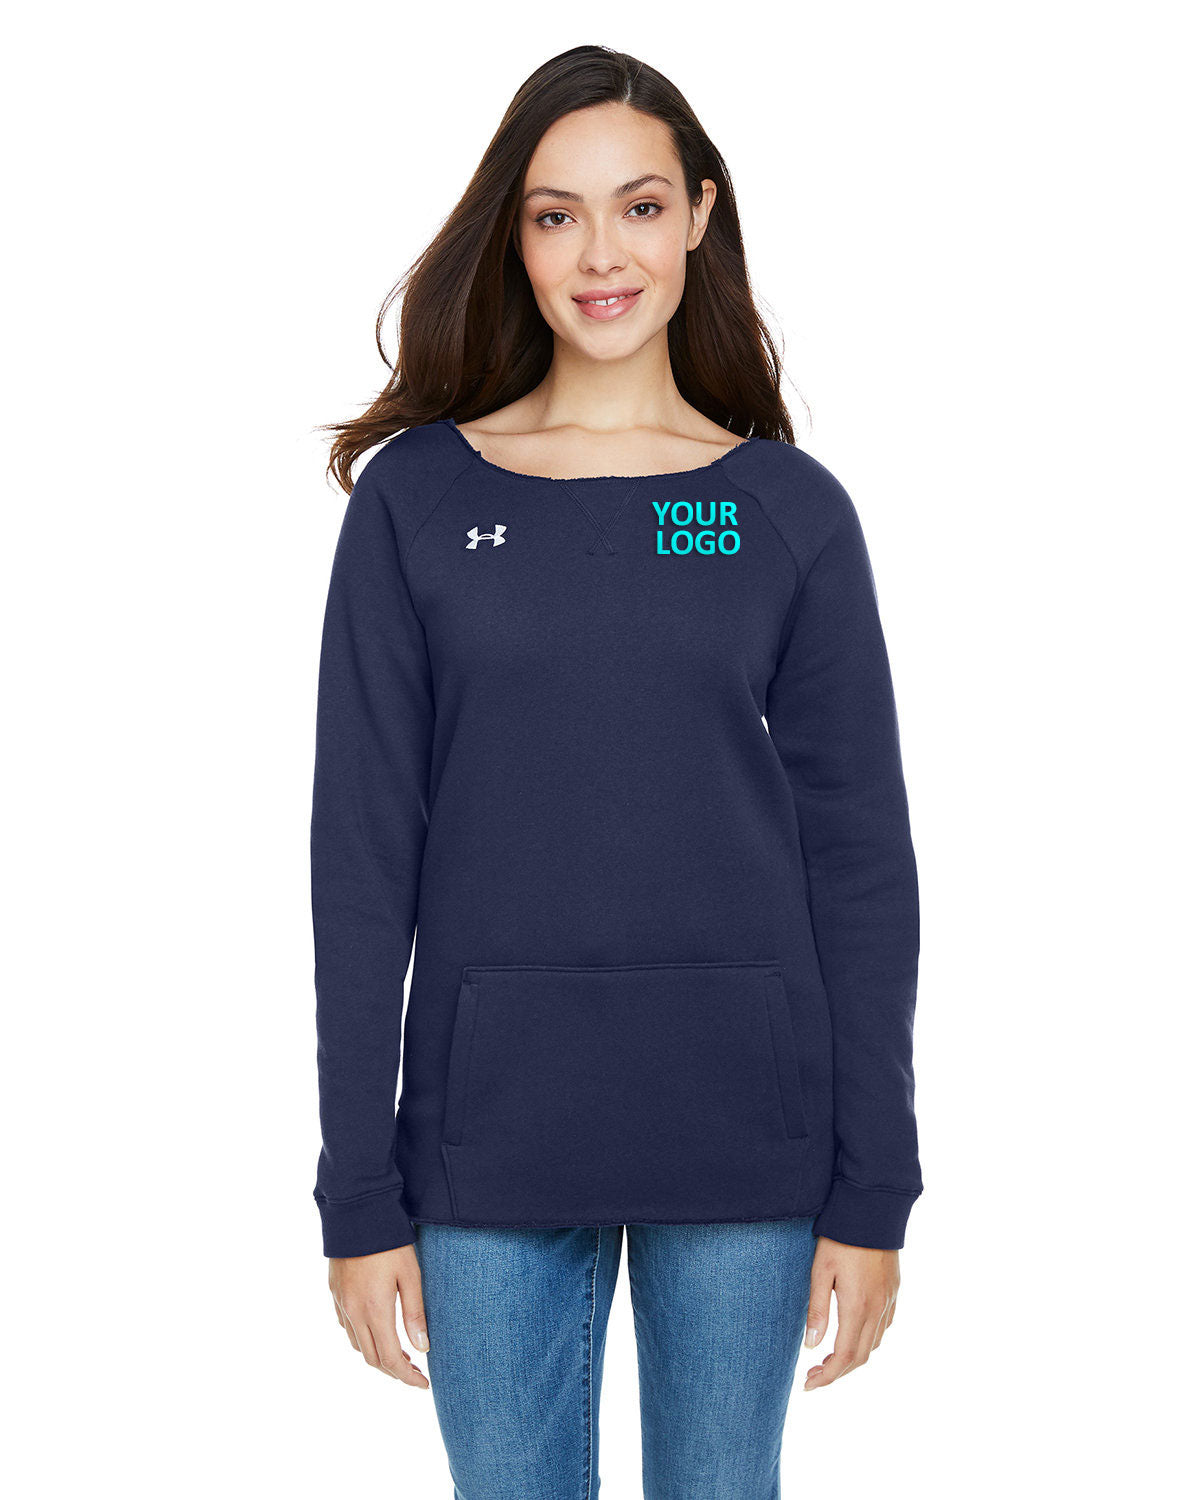 custom sweatshirts for business Under Armour MID NVY/ WH 410 1305784